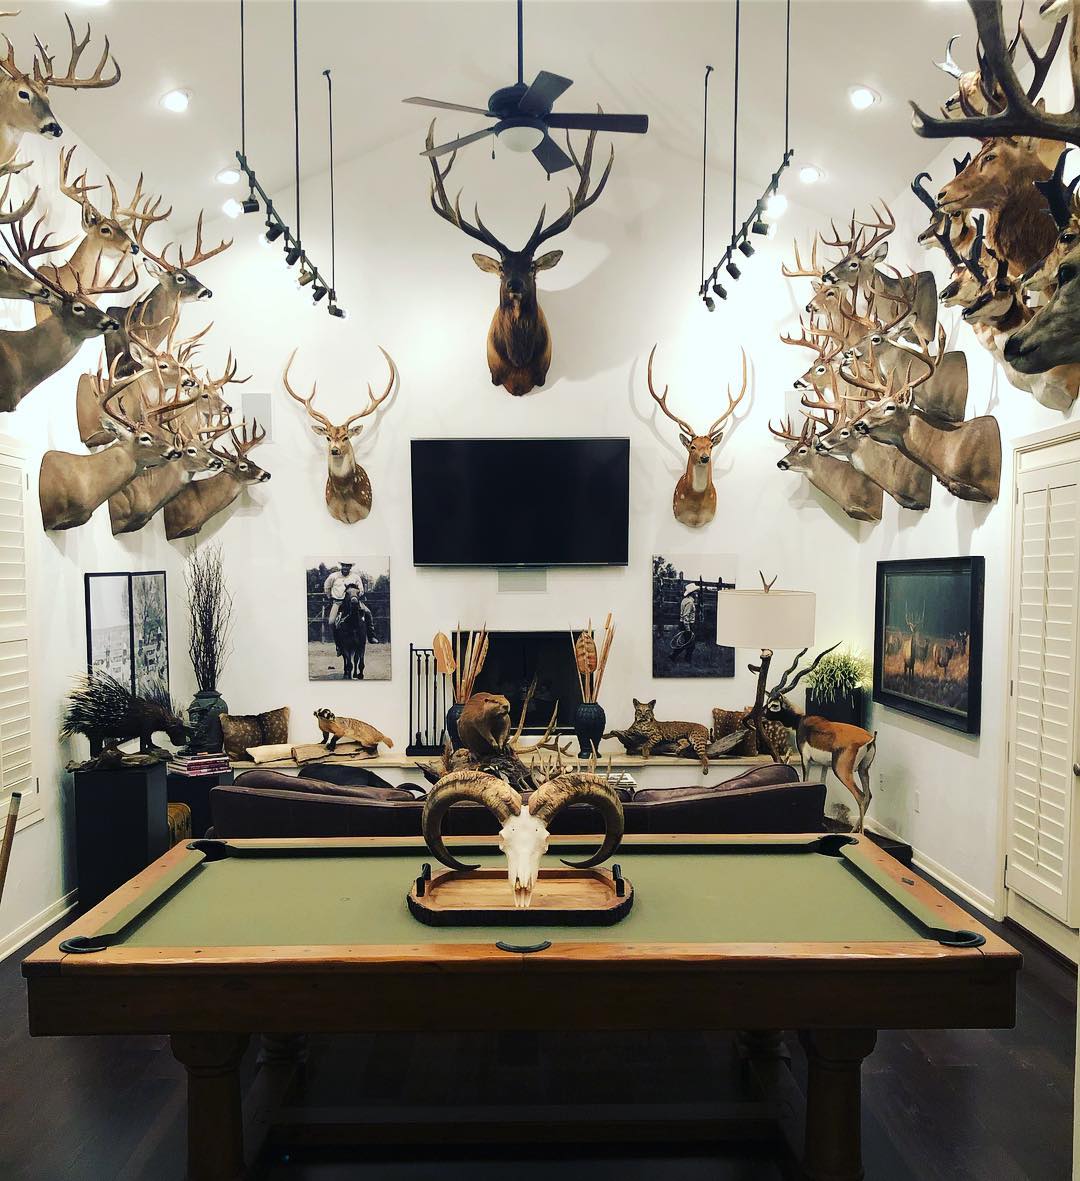 Big Game Trophy Room with Pool Table and Large TV on the Wall. Photo by Instagram user @winn_adami91